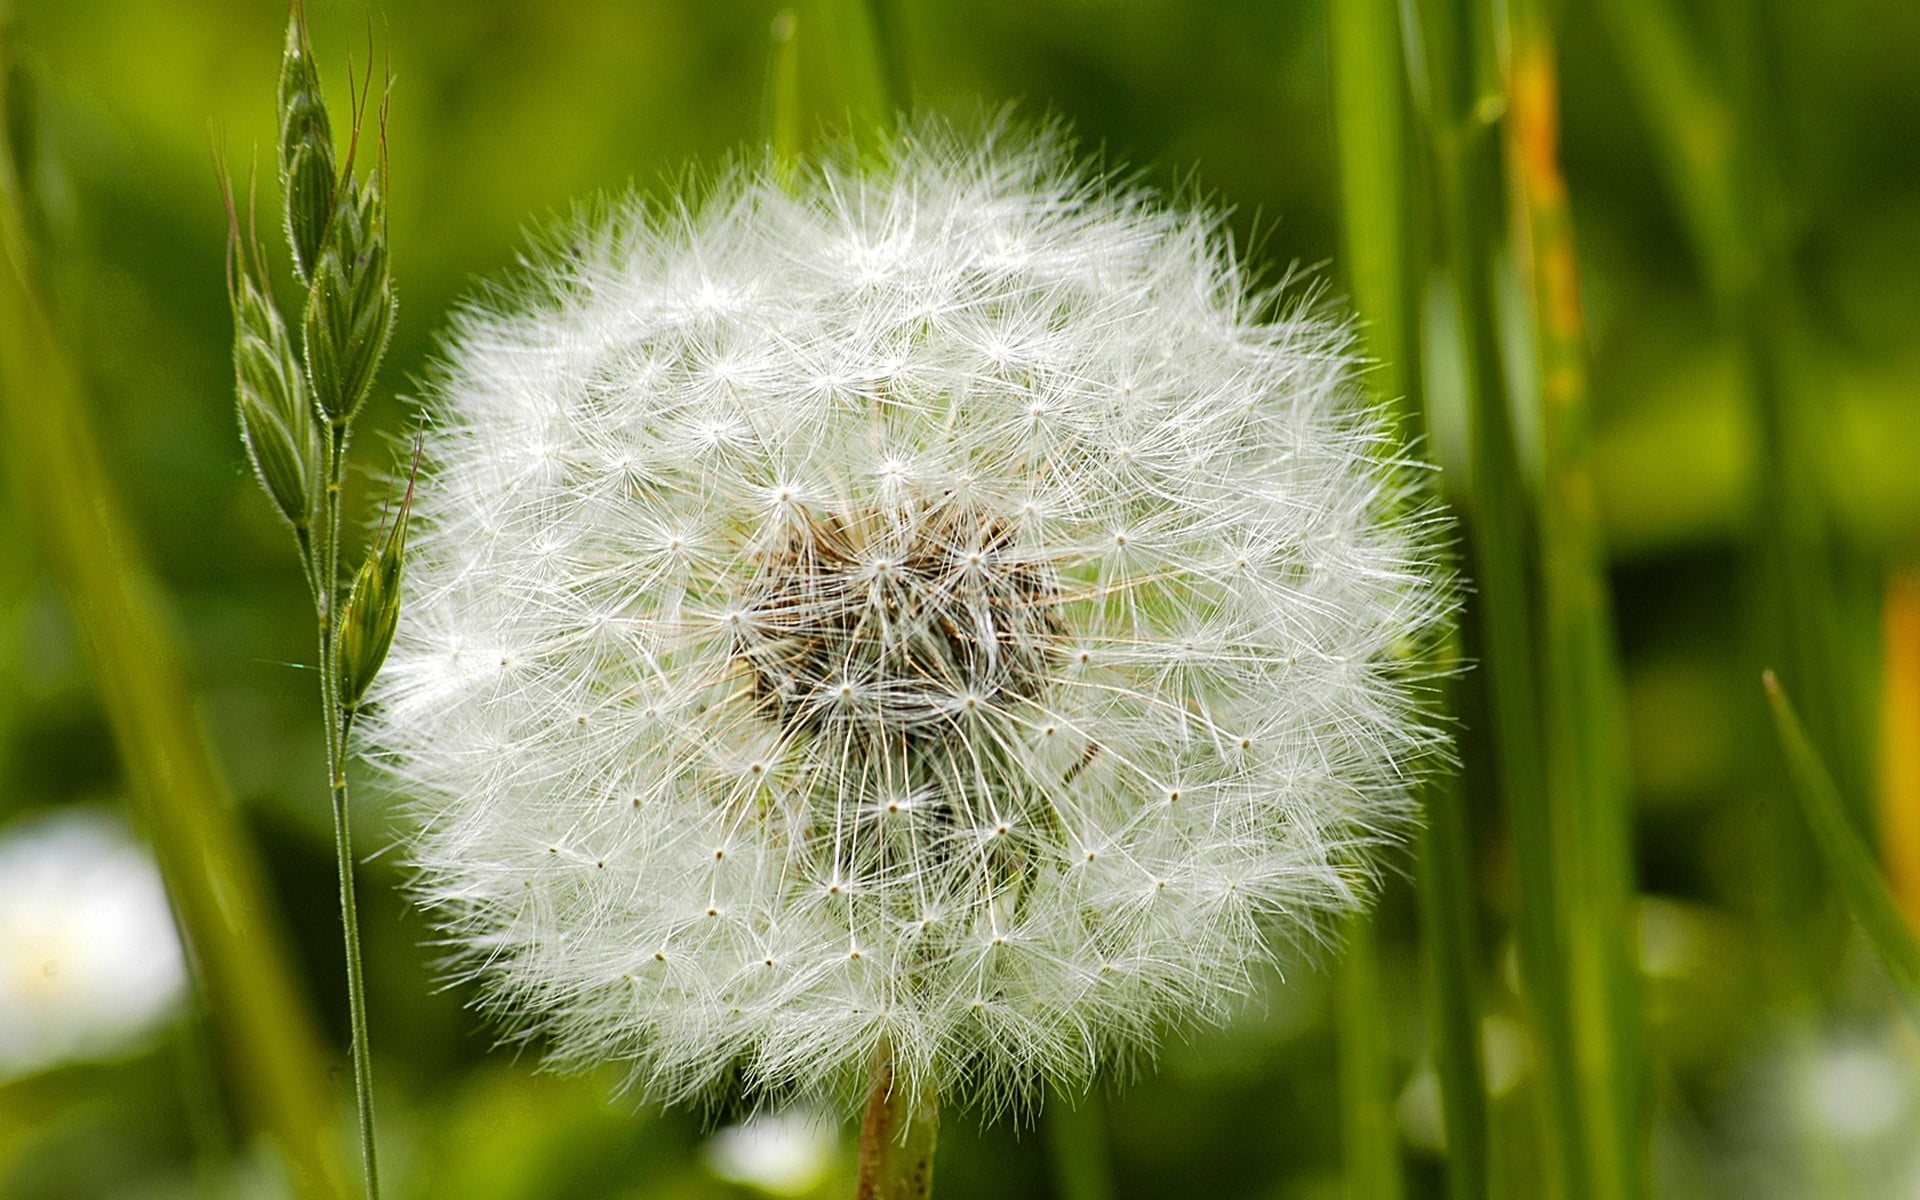 white dandelion, grass, feathers, seeds, nature, plant, close-up